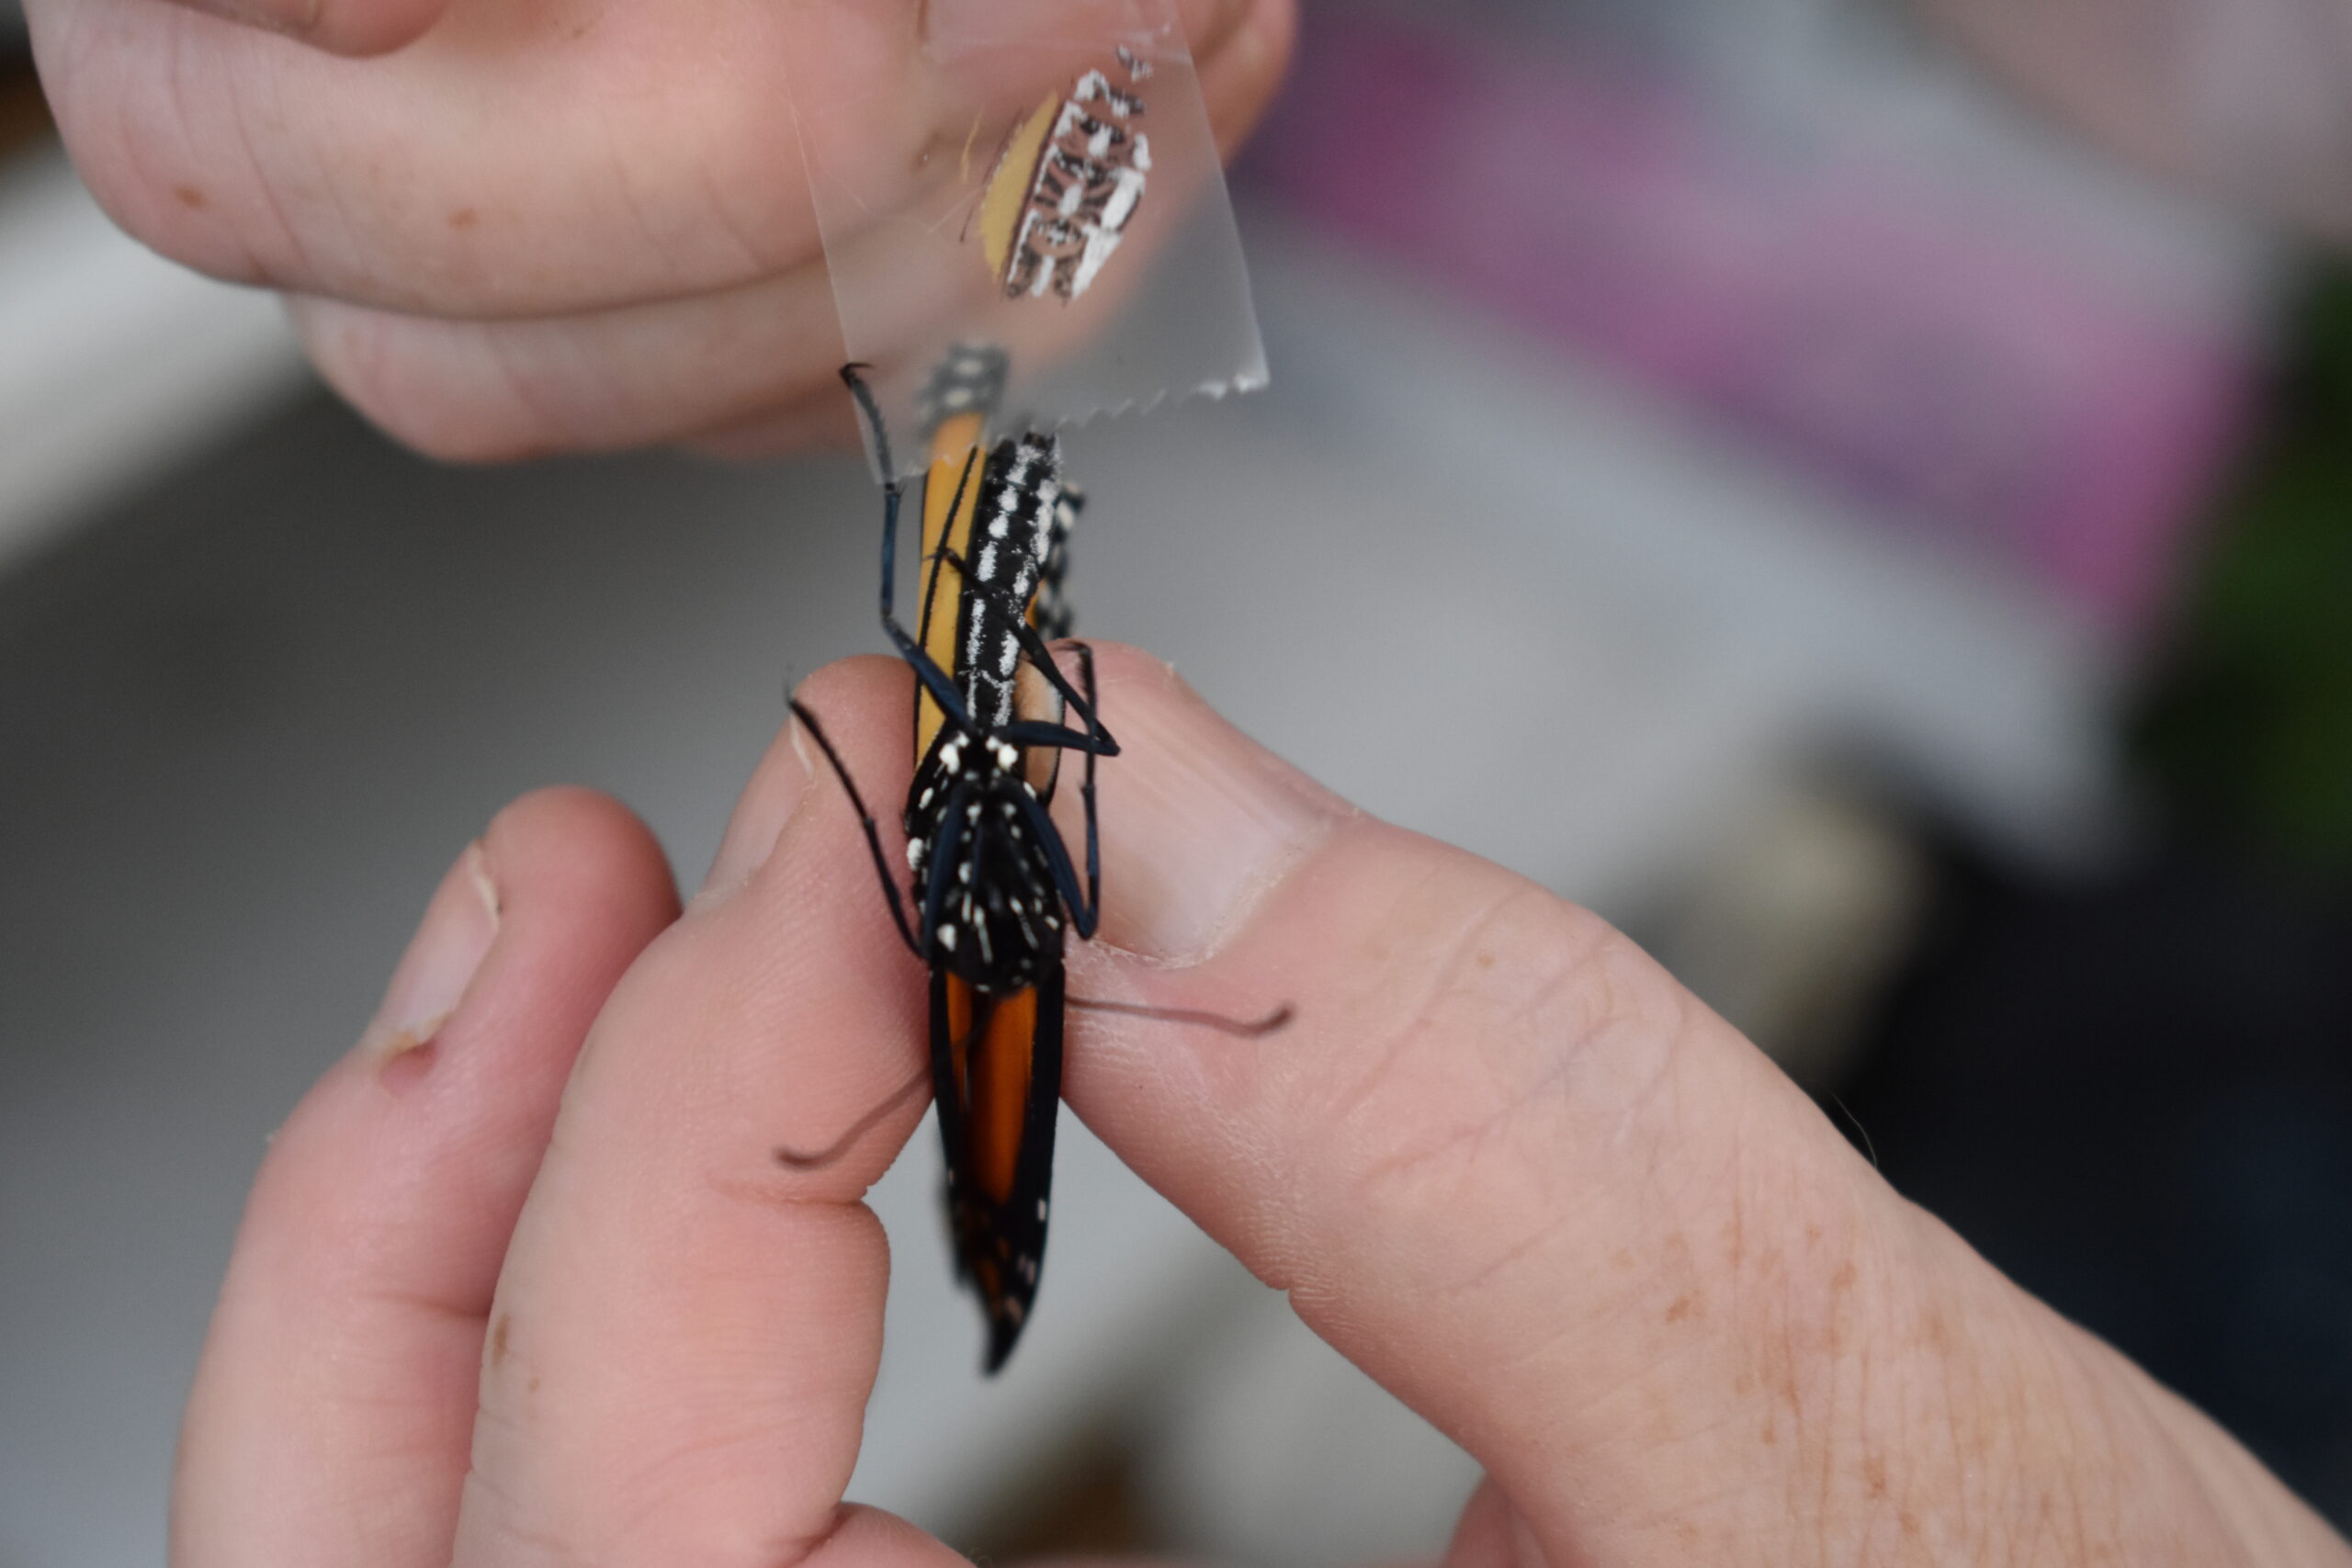 Mary Vienneau tests a newly emerged monarch butterfly for OE spores.  BRENDAN J. O'REILLY